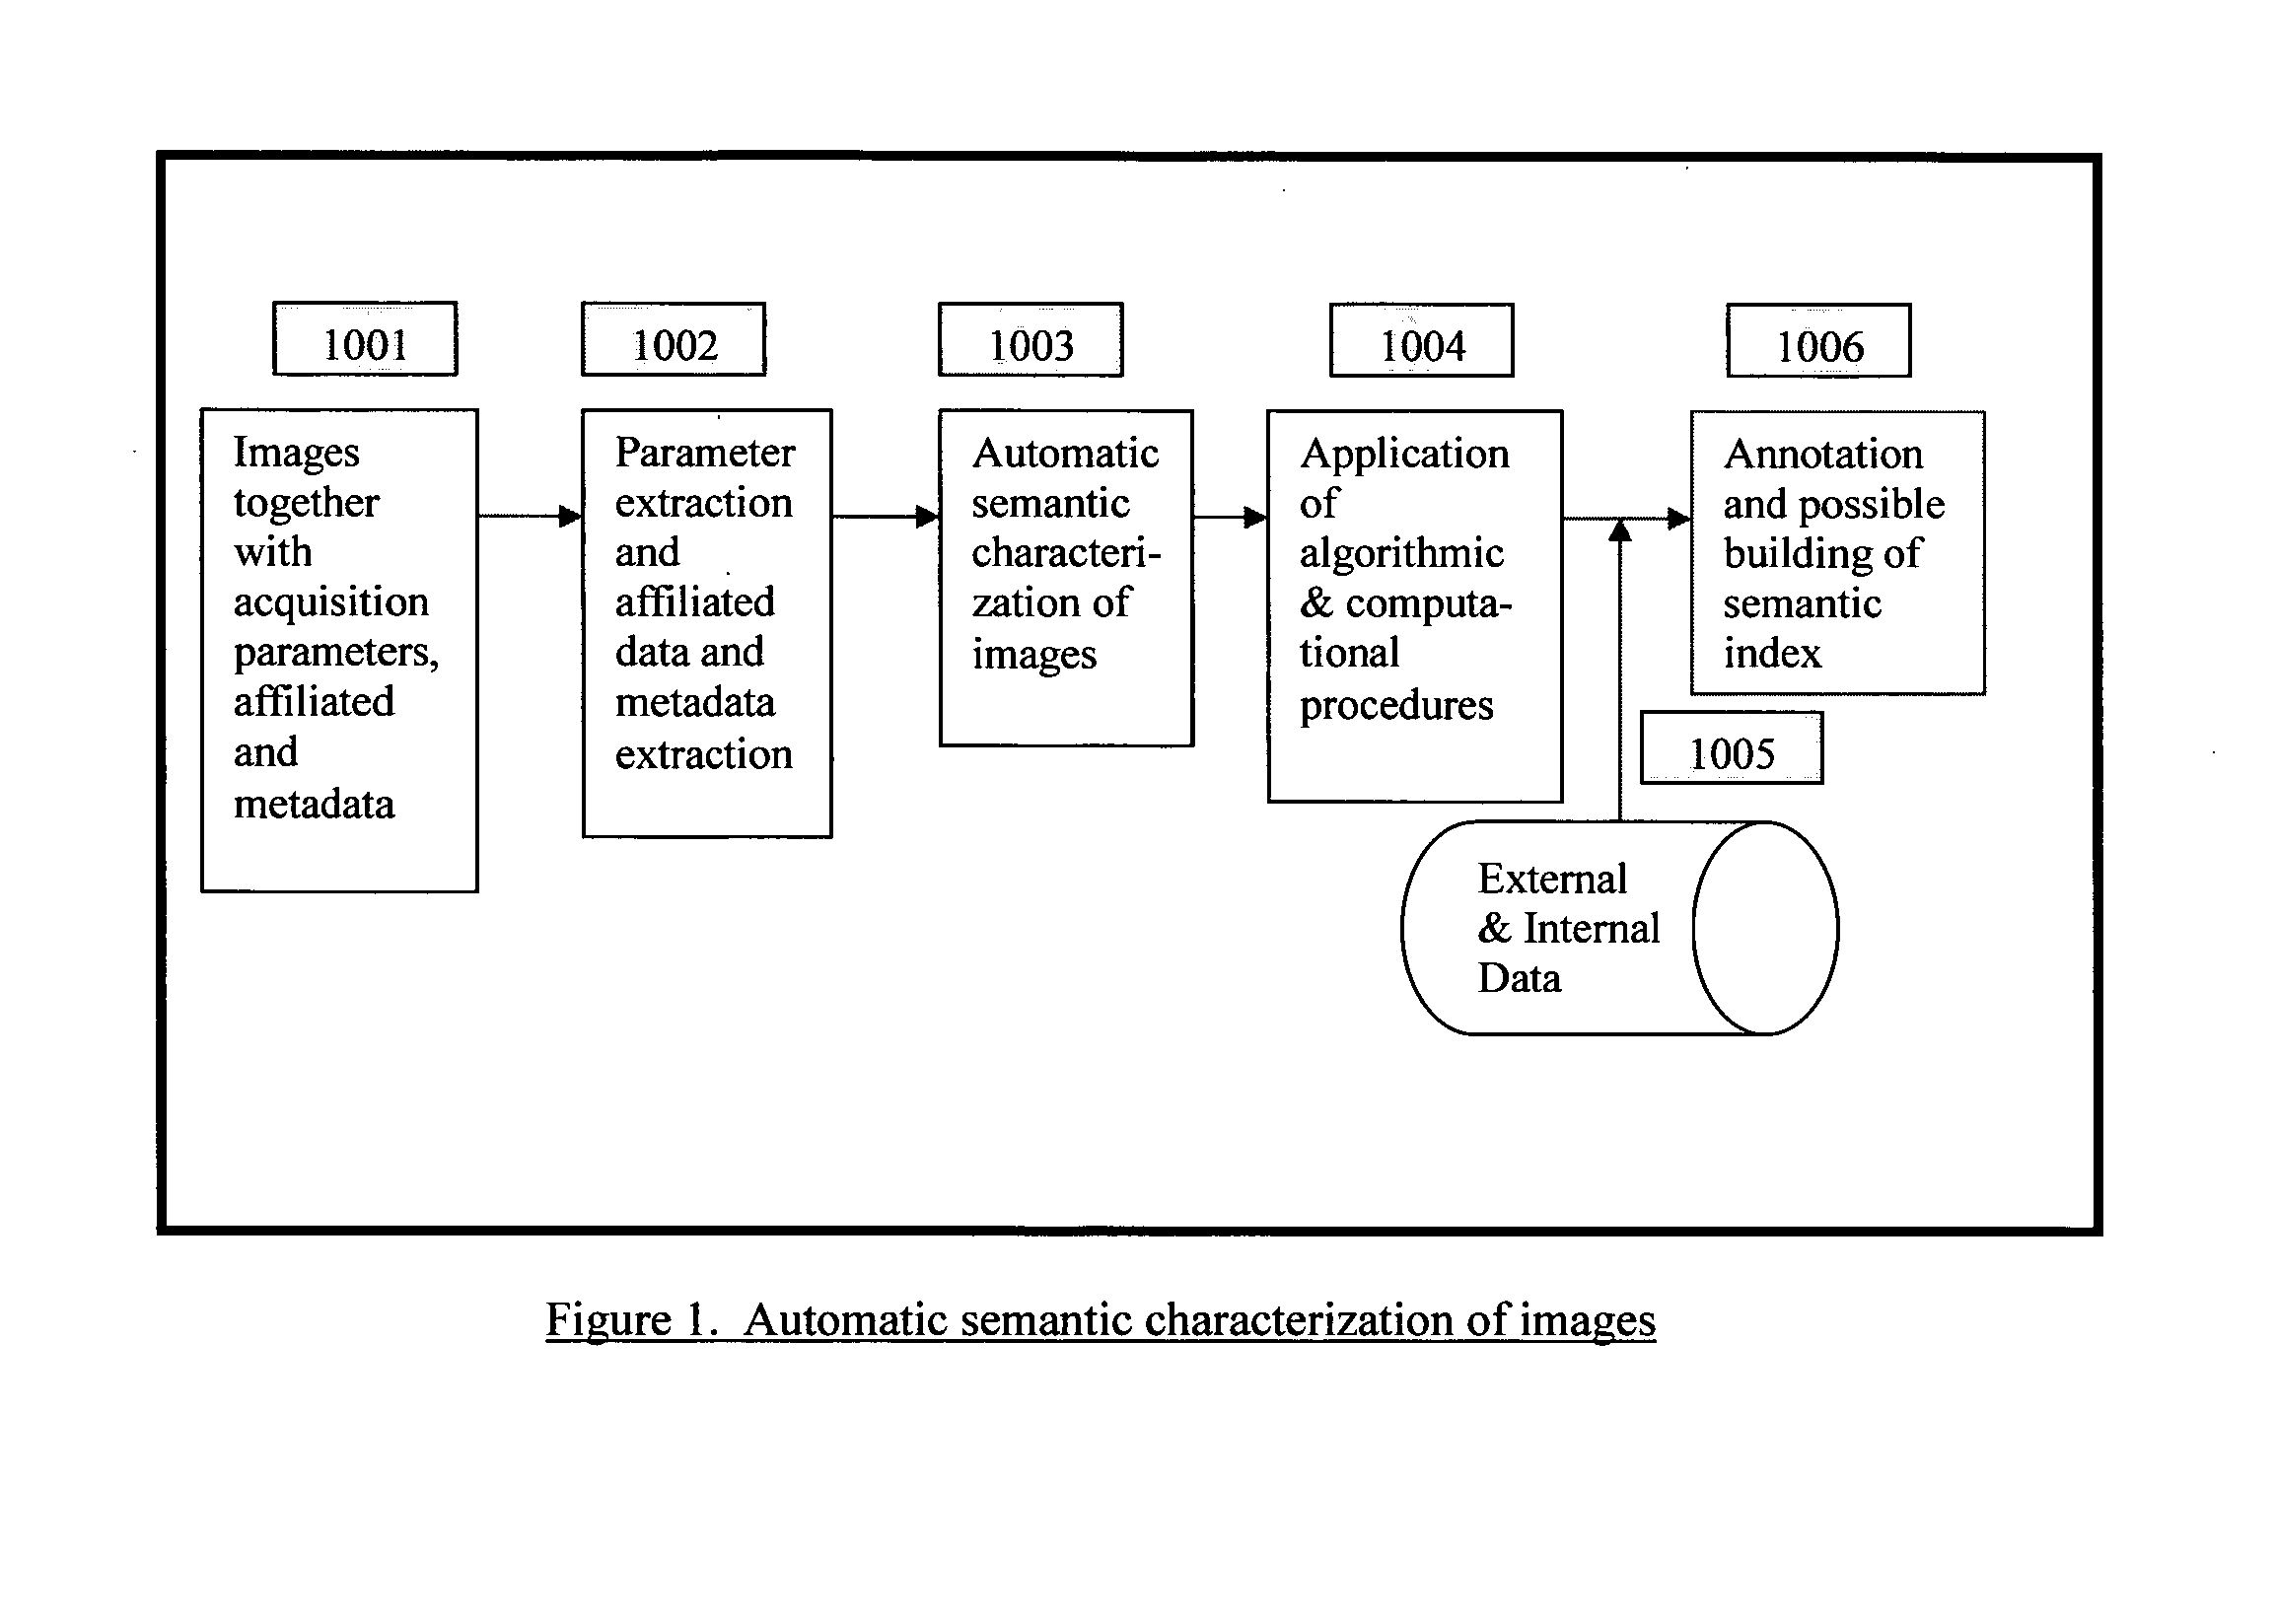 Automatic and Semi-automatic Image Classification, Annotation and Tagging Through the Use of Image Acquisition Parameters and Metadata